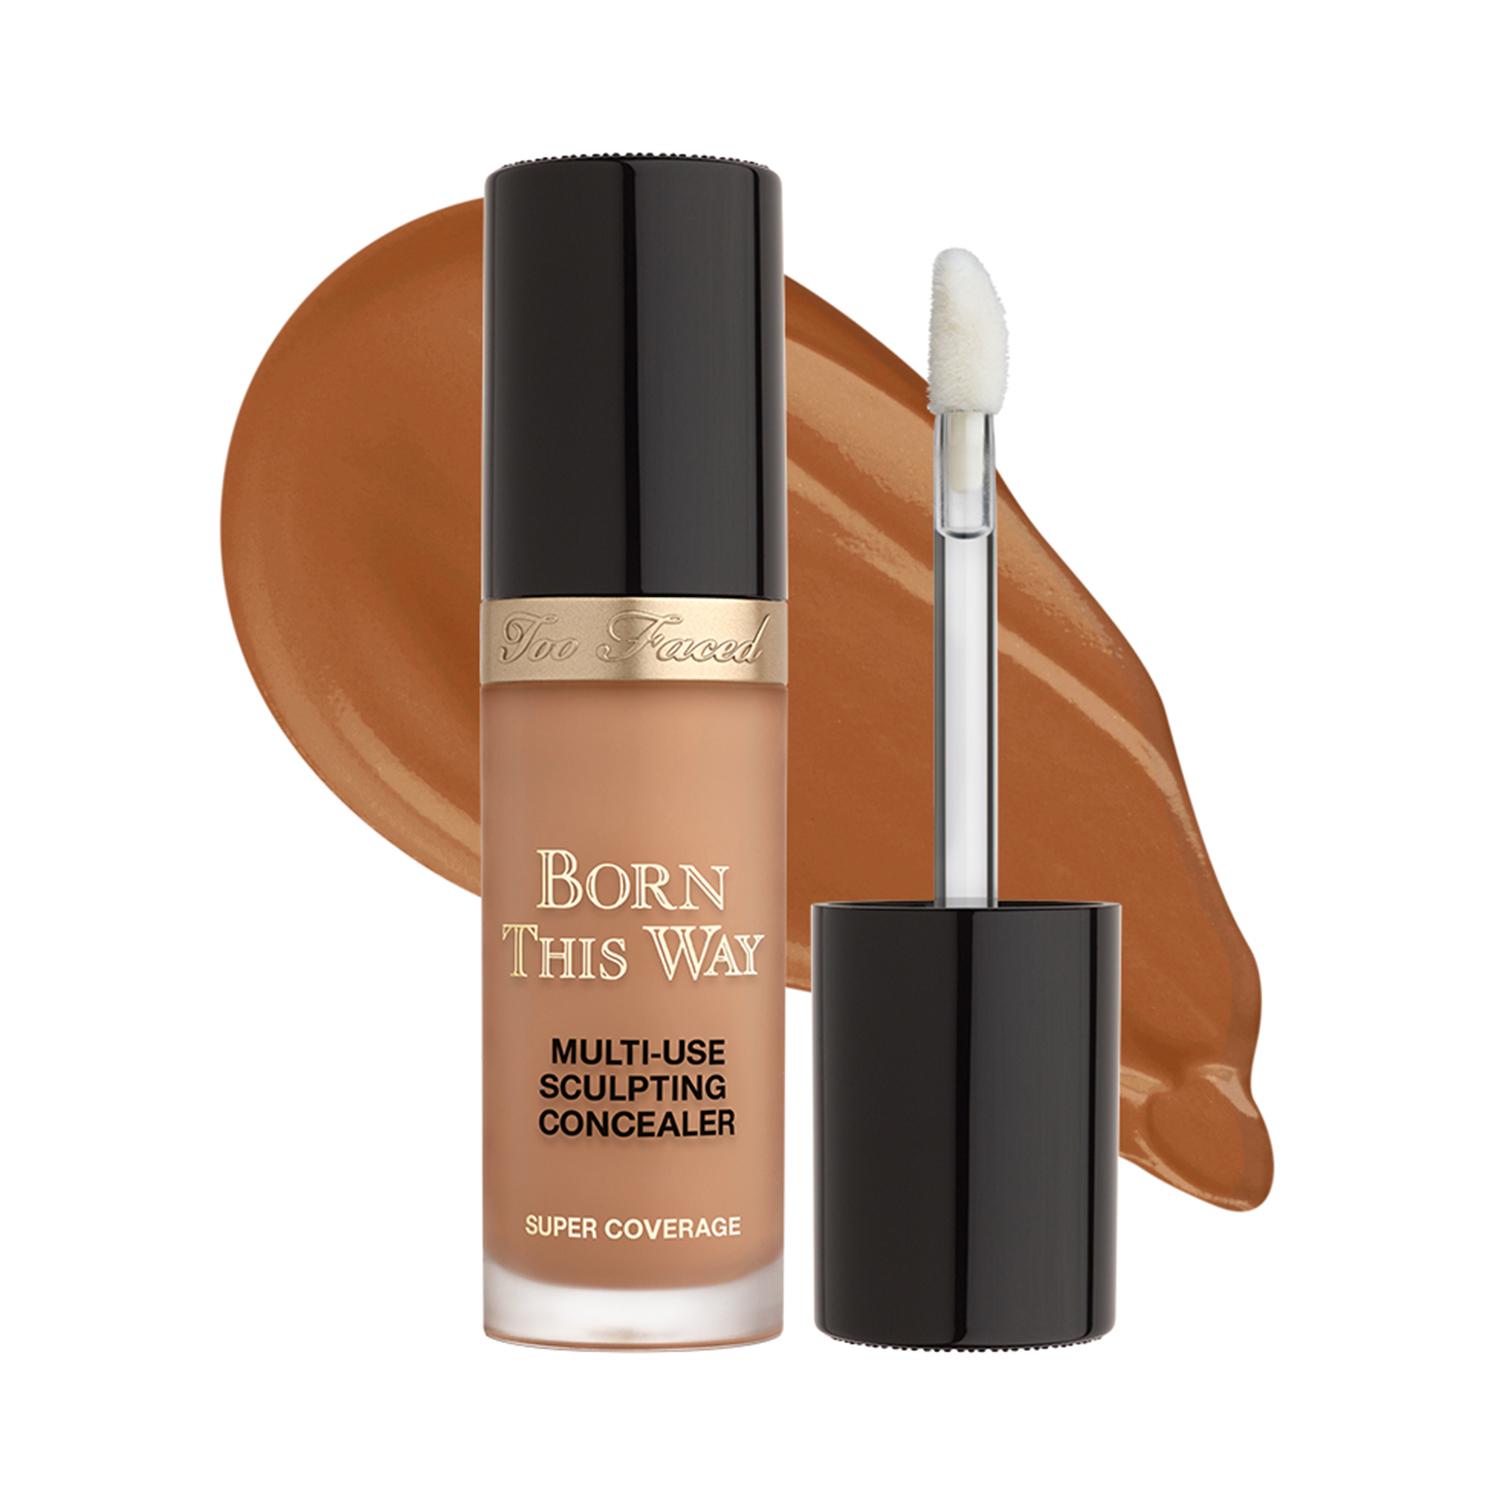 Too Faced | Too Faced Born This Way Super Coverage Multi Use Sculpting Concealer - Maple (13.5ml)